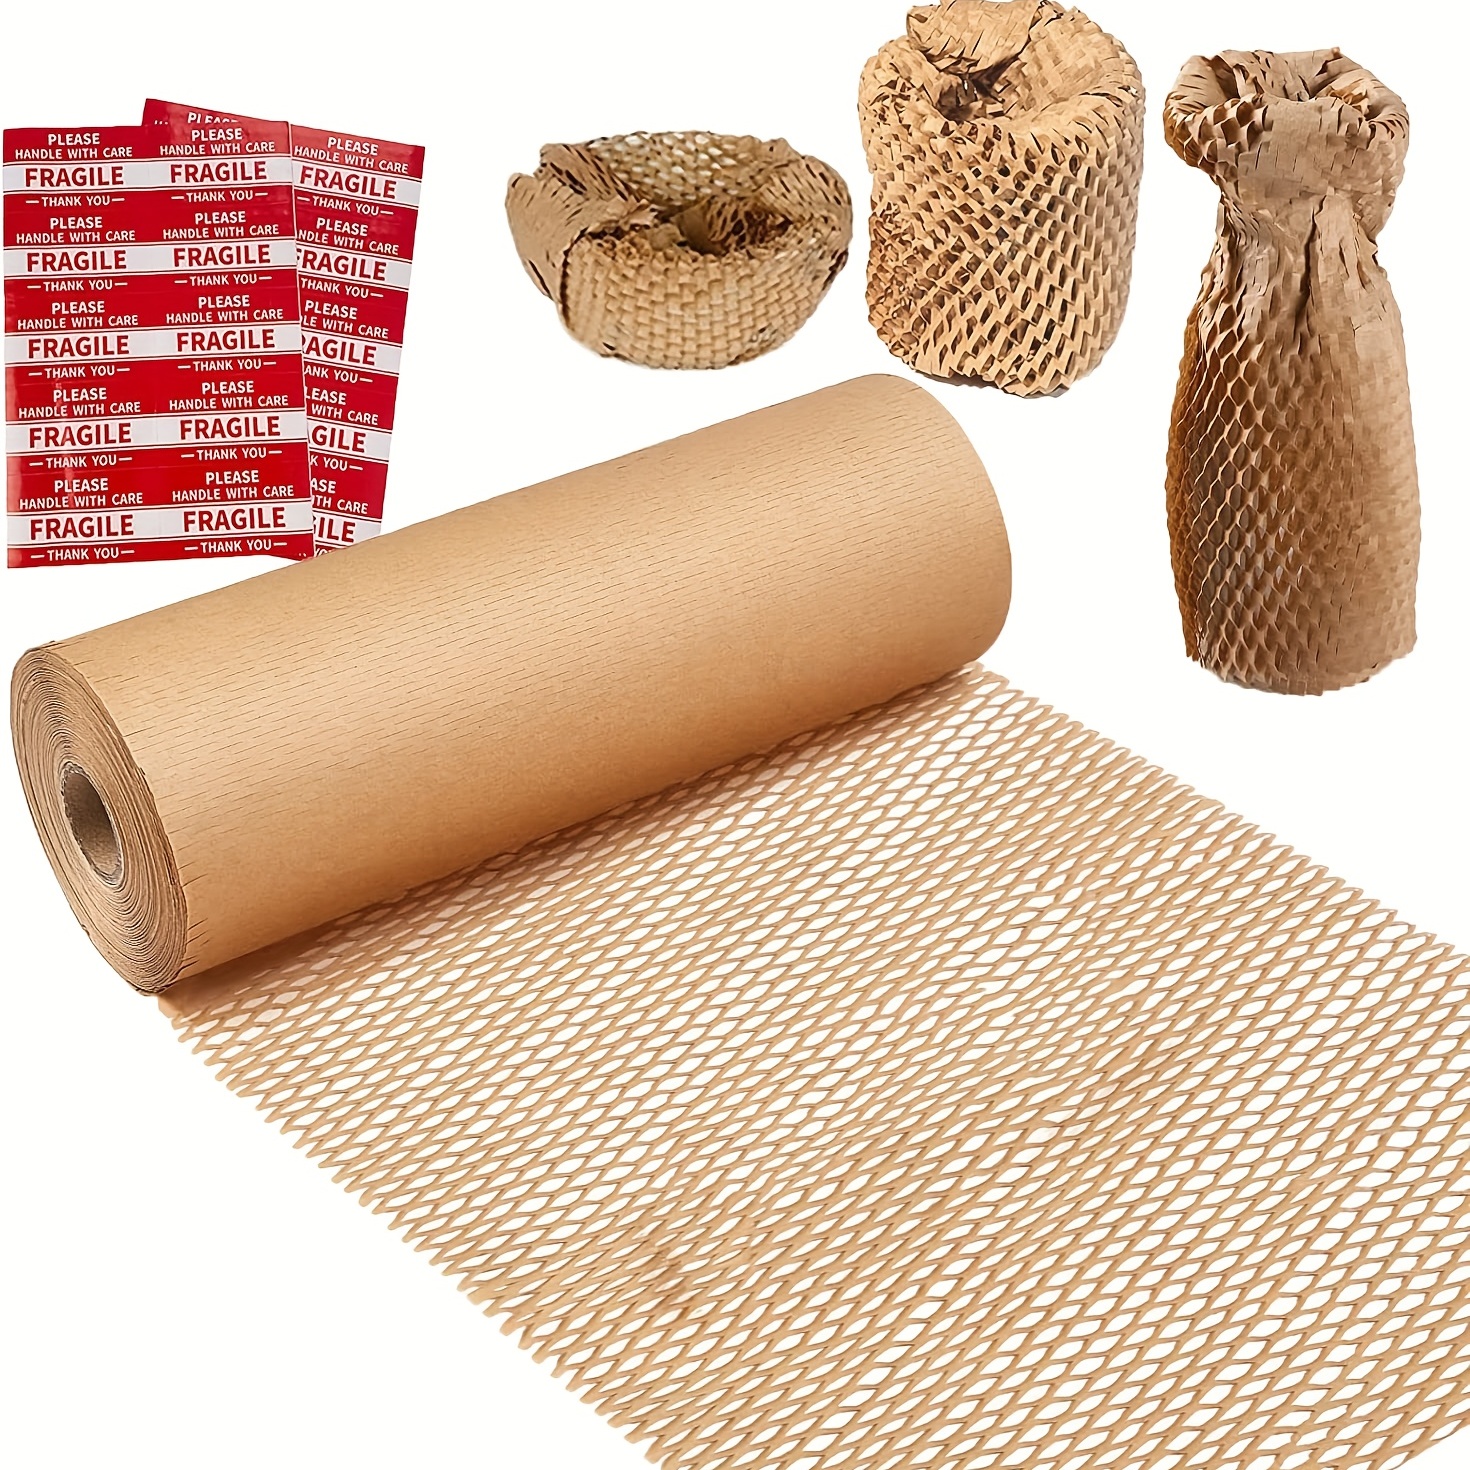 Newsprint Packing Paper Sheets for Moving, Shipping, Box Filler, Wrapping  and Protecting Fragile Items 1.3 Lbs (50 Sheets, 26” x 15”)